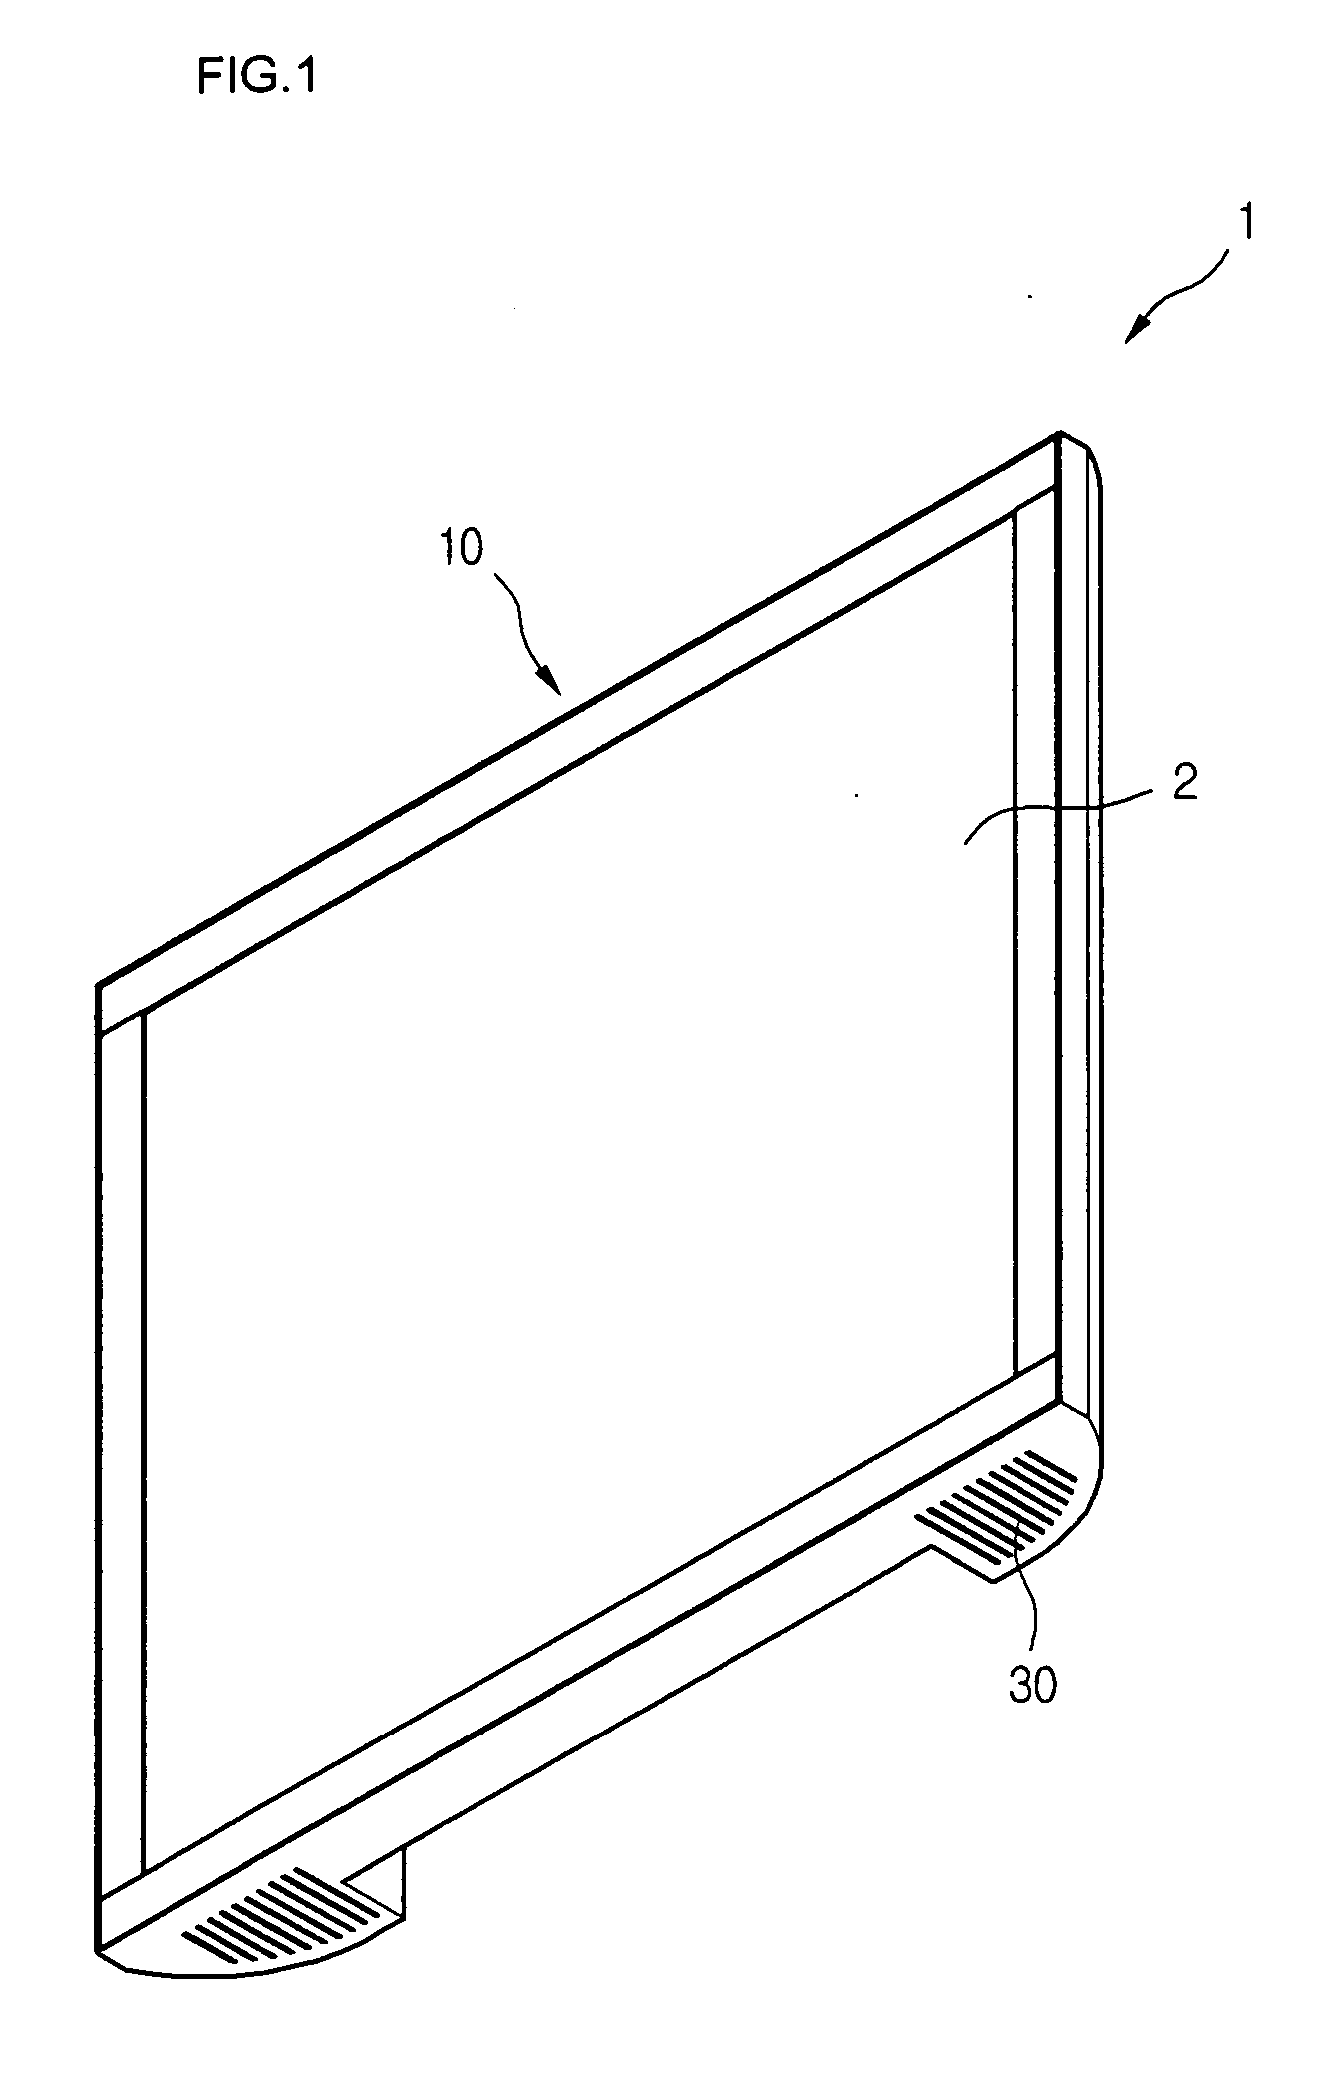 Display device, cabinet assembly for the display device and method of assembling the display device